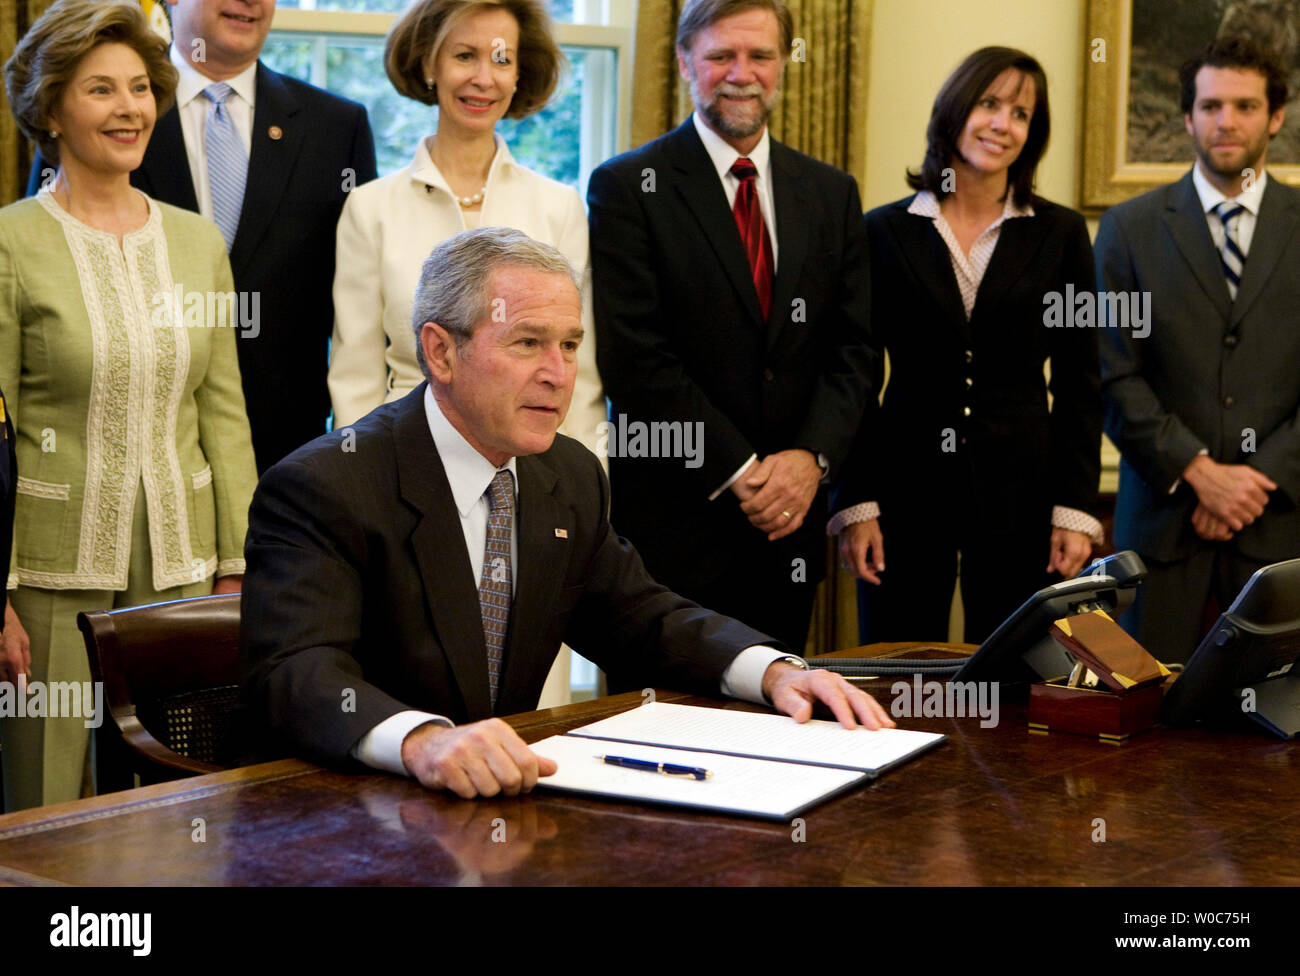 U.S. President George W. Bush signs a Presidential Proclamation in honor of Malaria Awareness Day at the White House in Washington on April 25, 2008. (UPI Photo/Patrick D. McDermott) Stock Photo